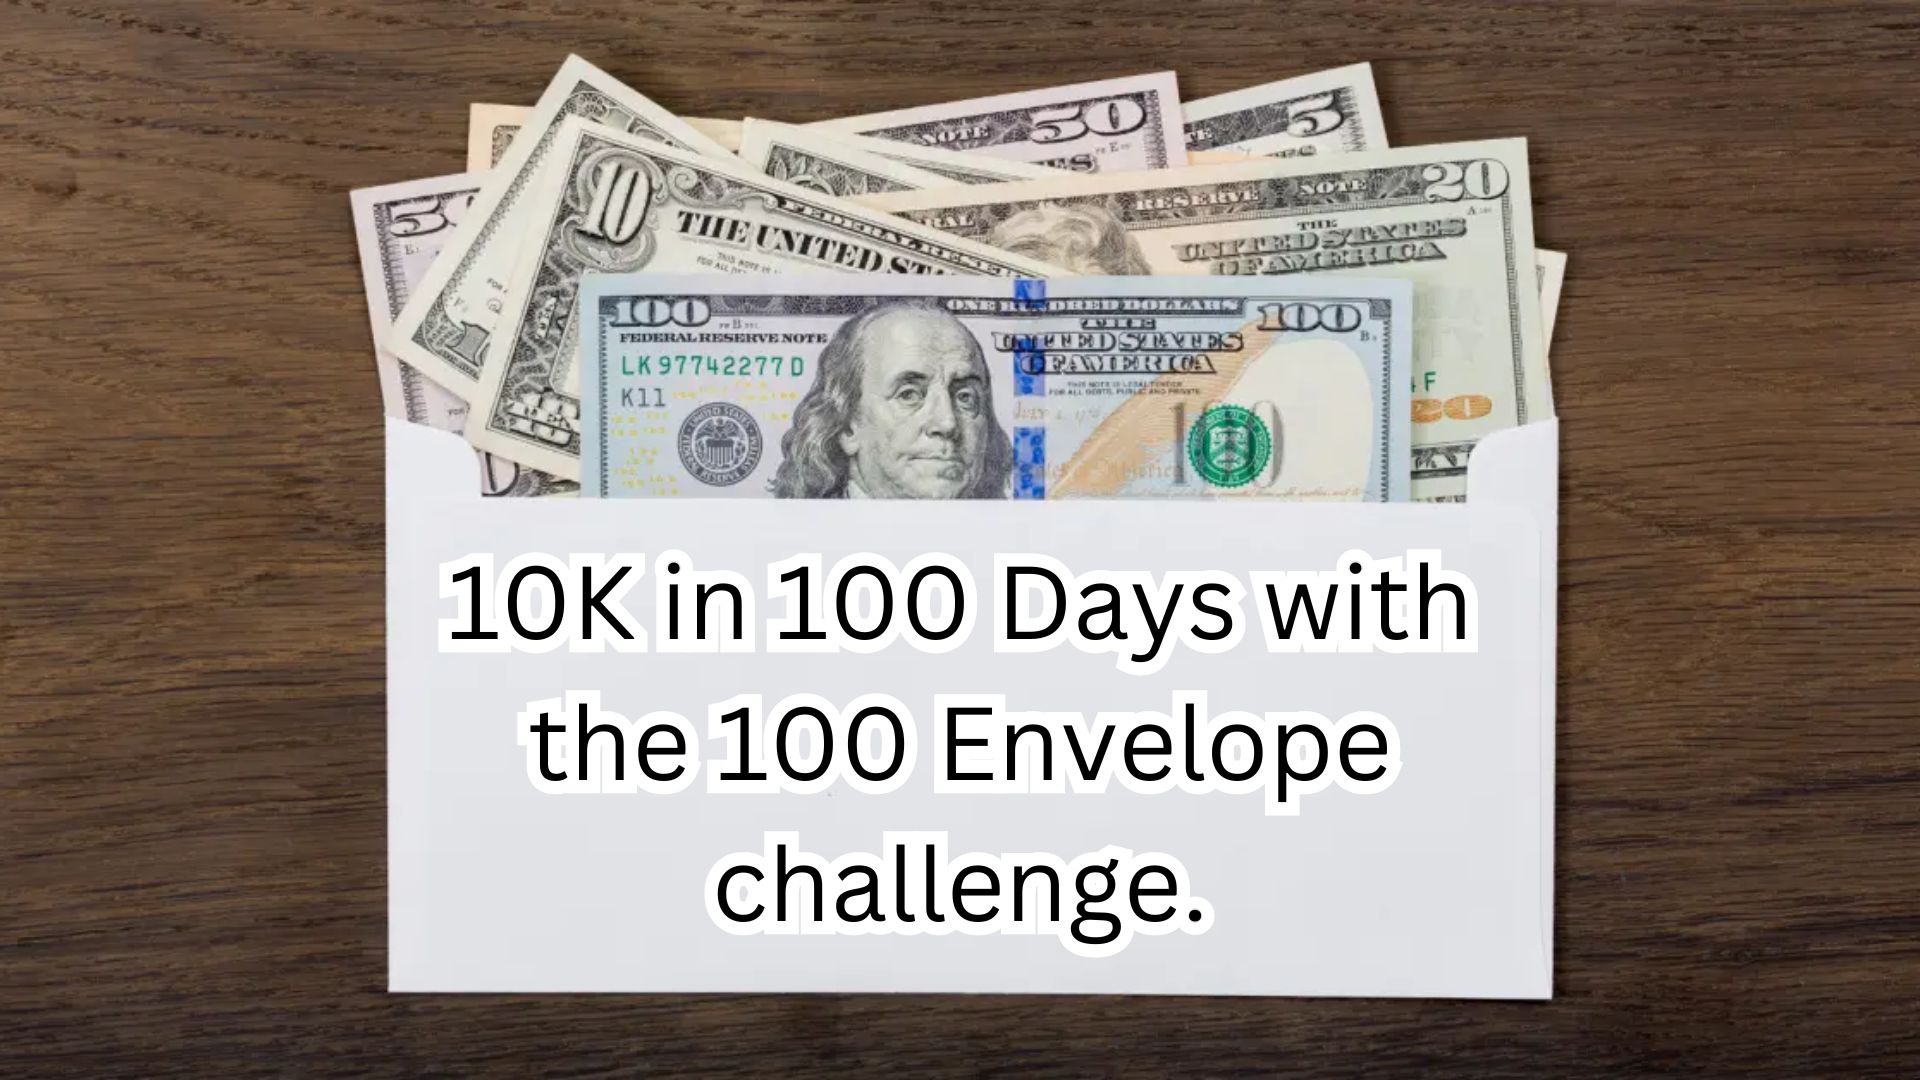 10K in 100 Days with the 100 Envelope challenge.